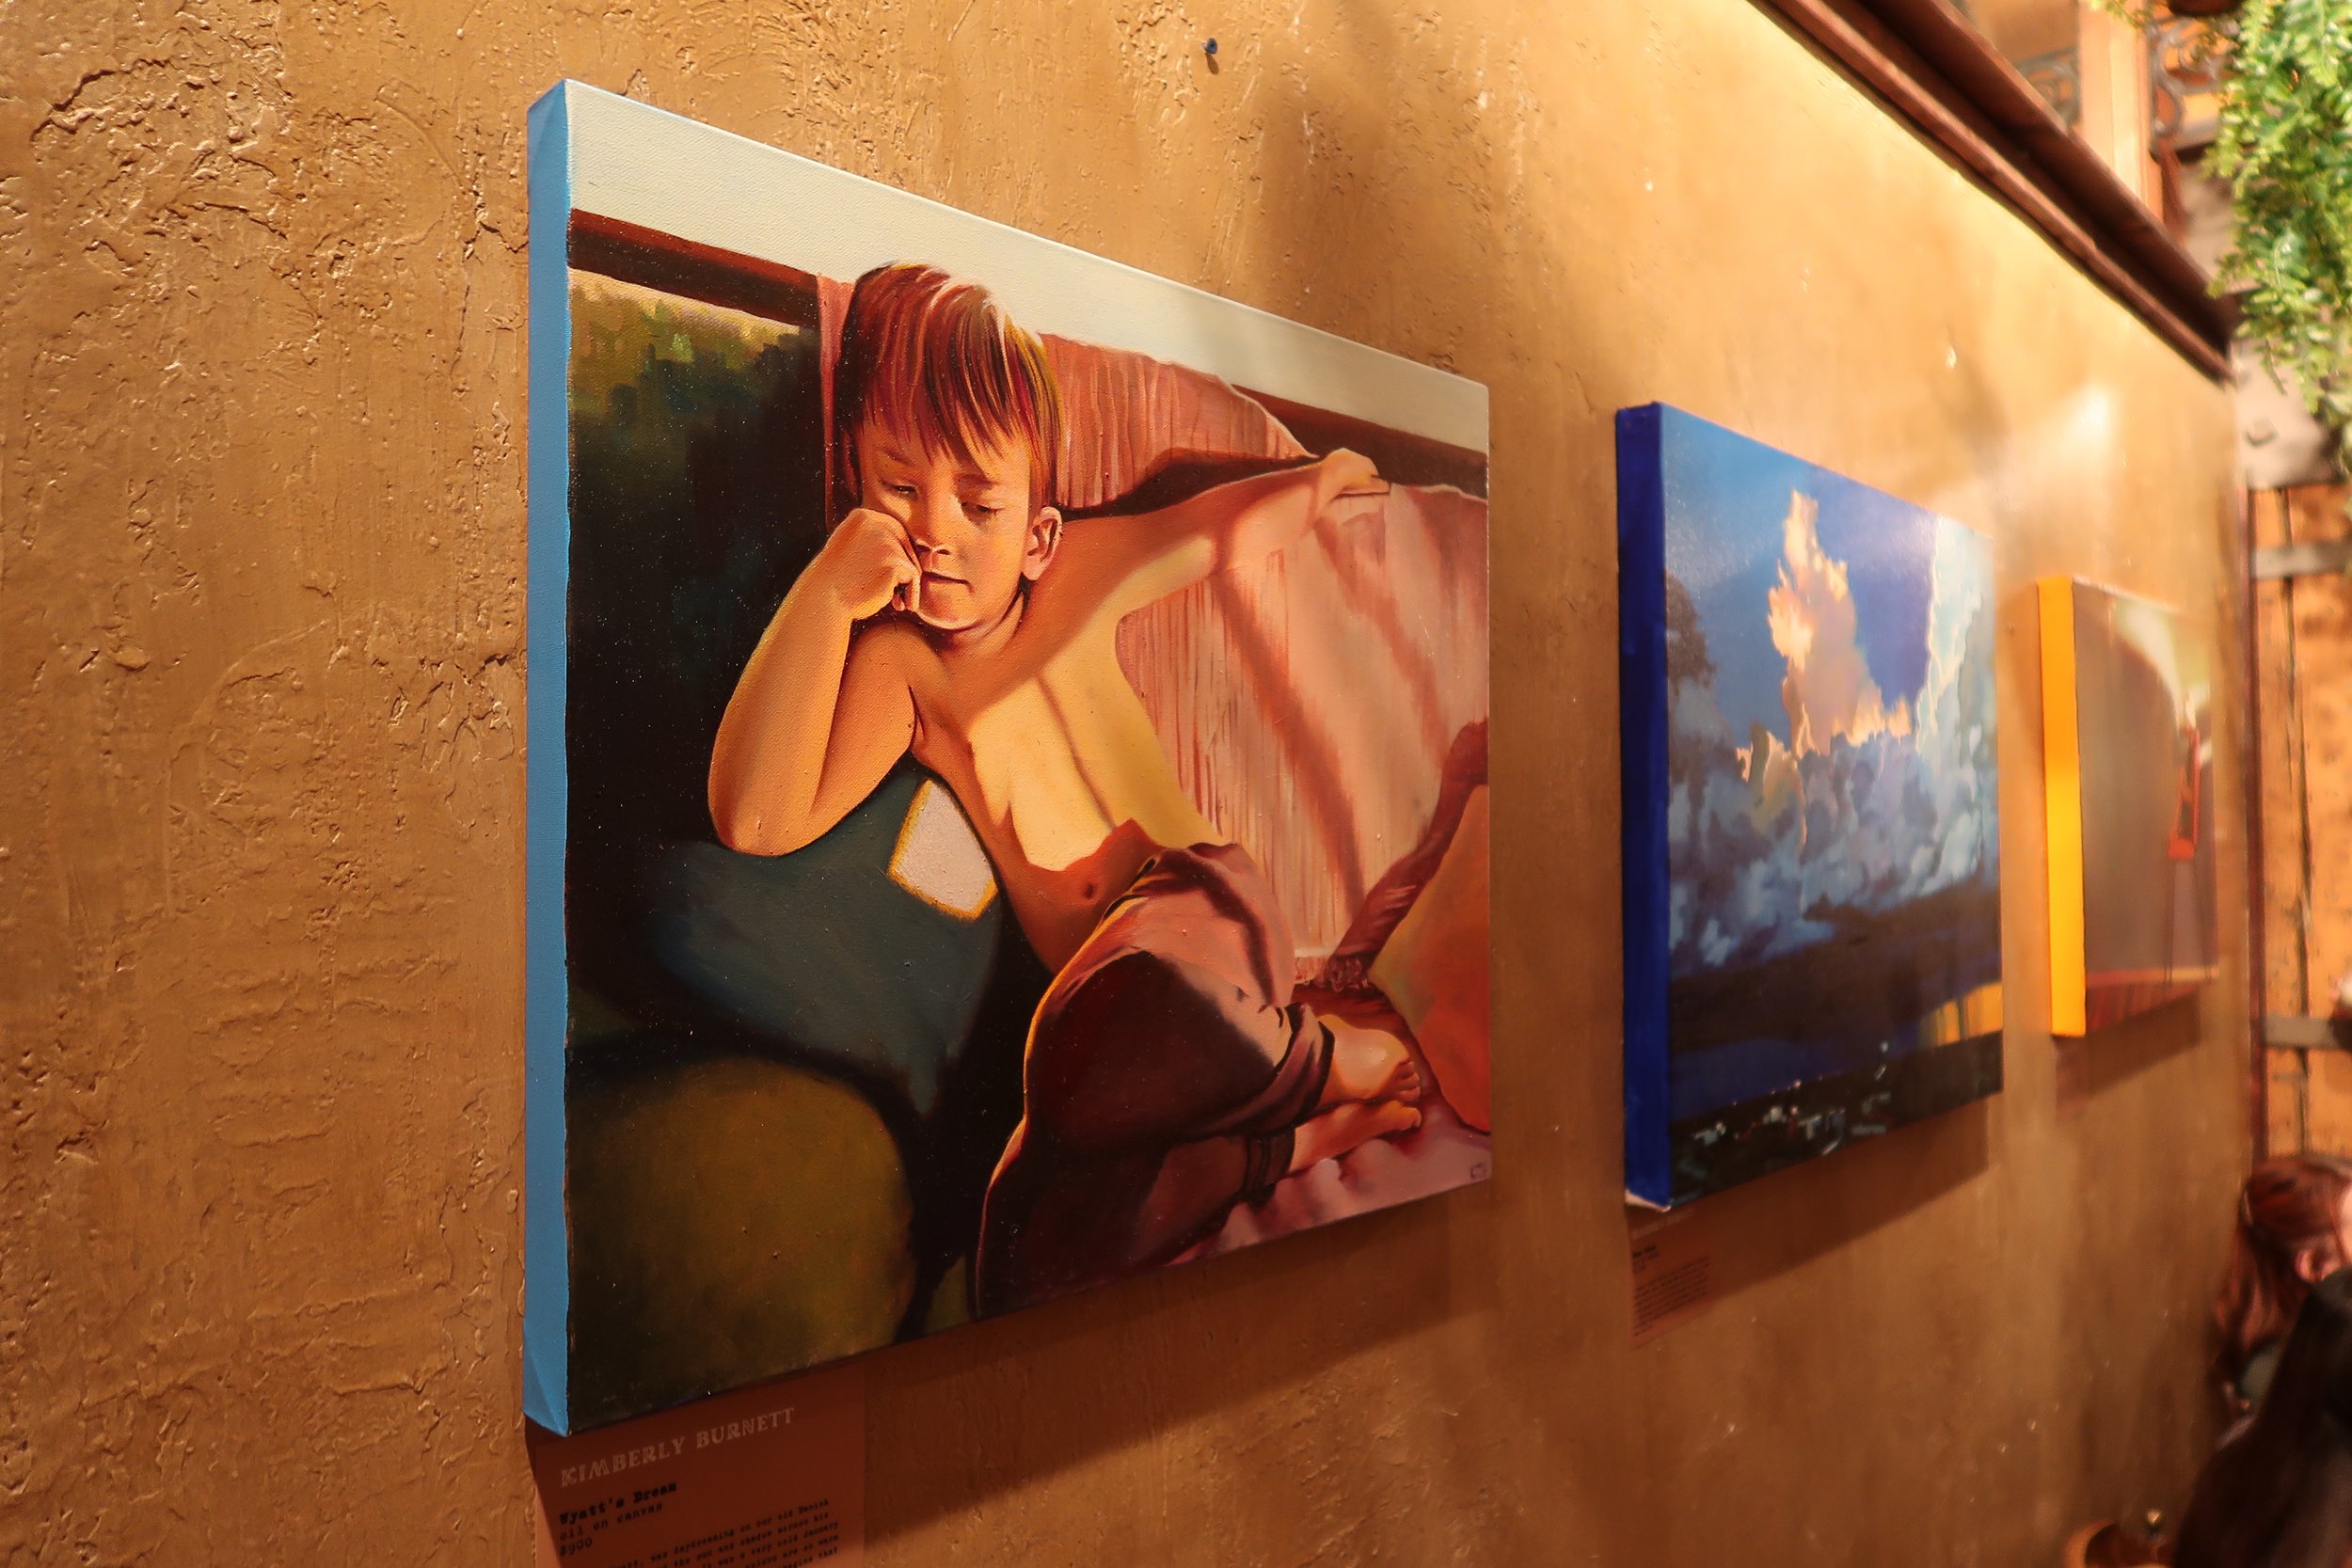  Oil paintings featuring a young portrait and a stormy landscape by artist, Kimberly Burnett, hanging at Hygge: A Pop Up Gallery, curated by Milwaukee artist, Lauren Marie Nitka, at  Glassnote Candle Bar , Walker’s Point, WI. 